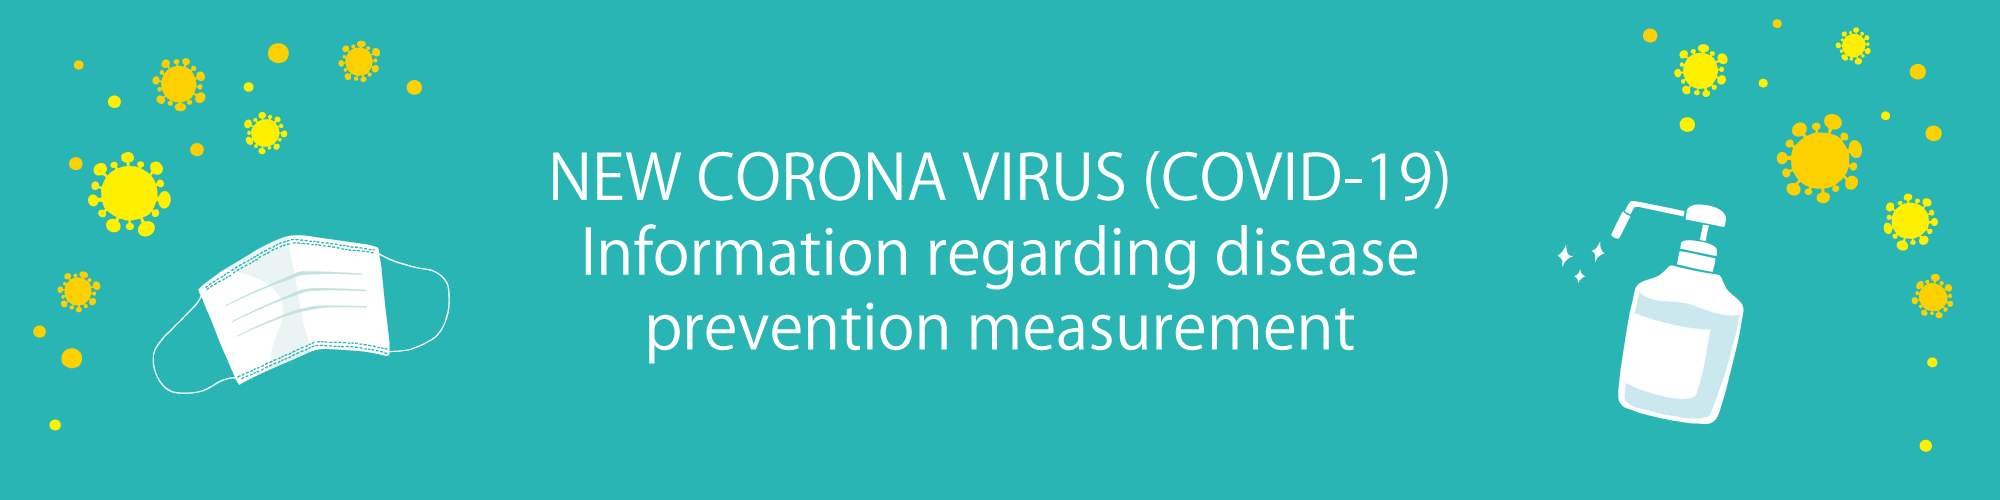 About the Prevention of COVID-19 Measures